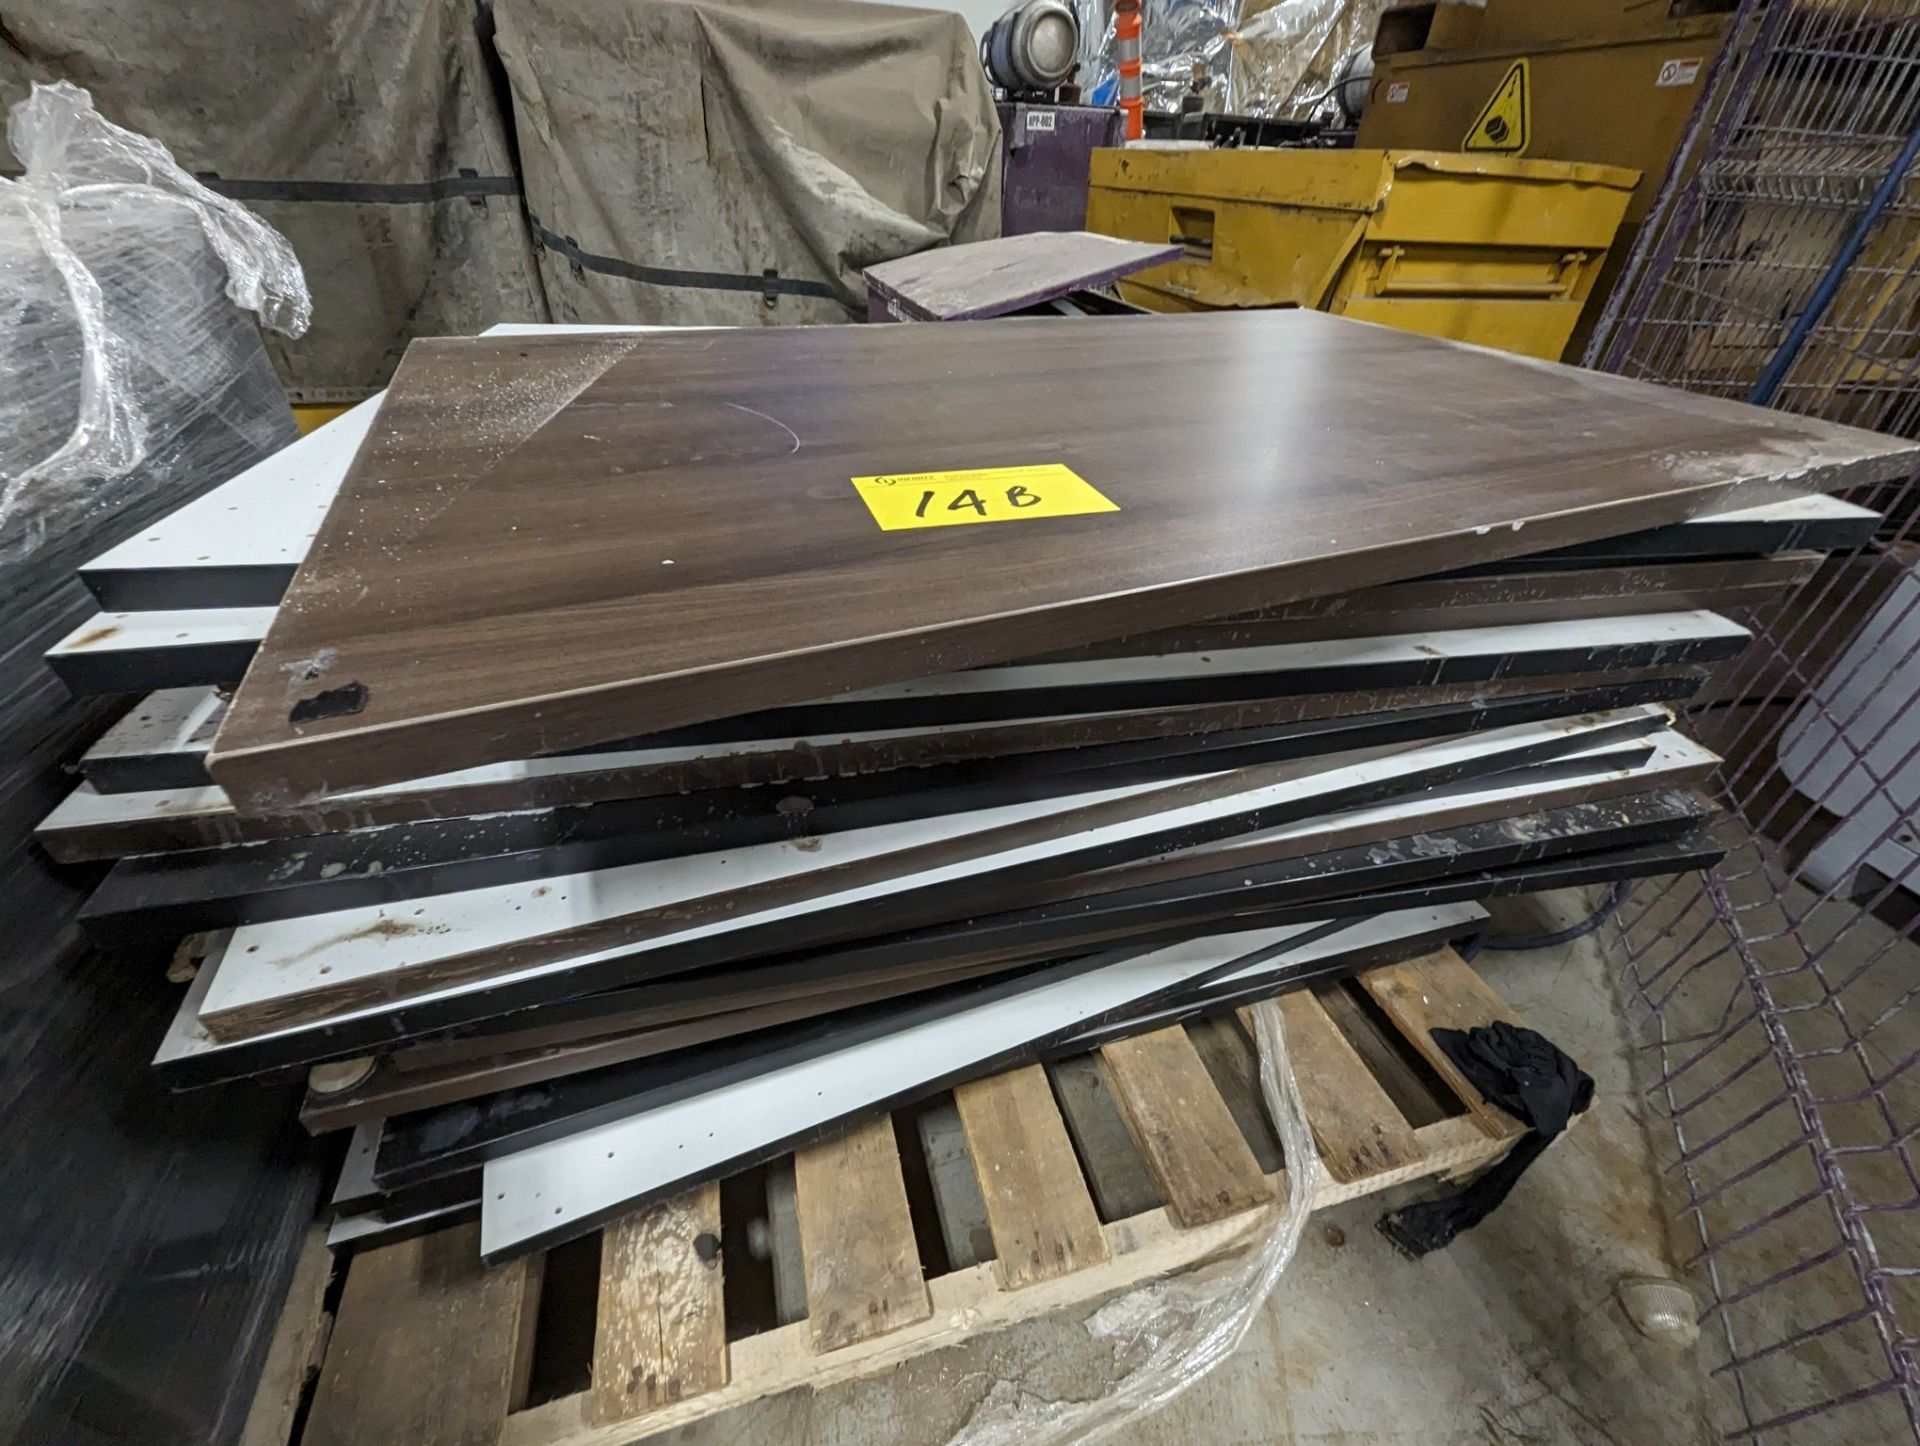 LOT OF (2) PALLETS OF DISASSEMBLED DESKS, WOODEN TABLE TOPS, METAL LEGS, ETC. - Image 2 of 6